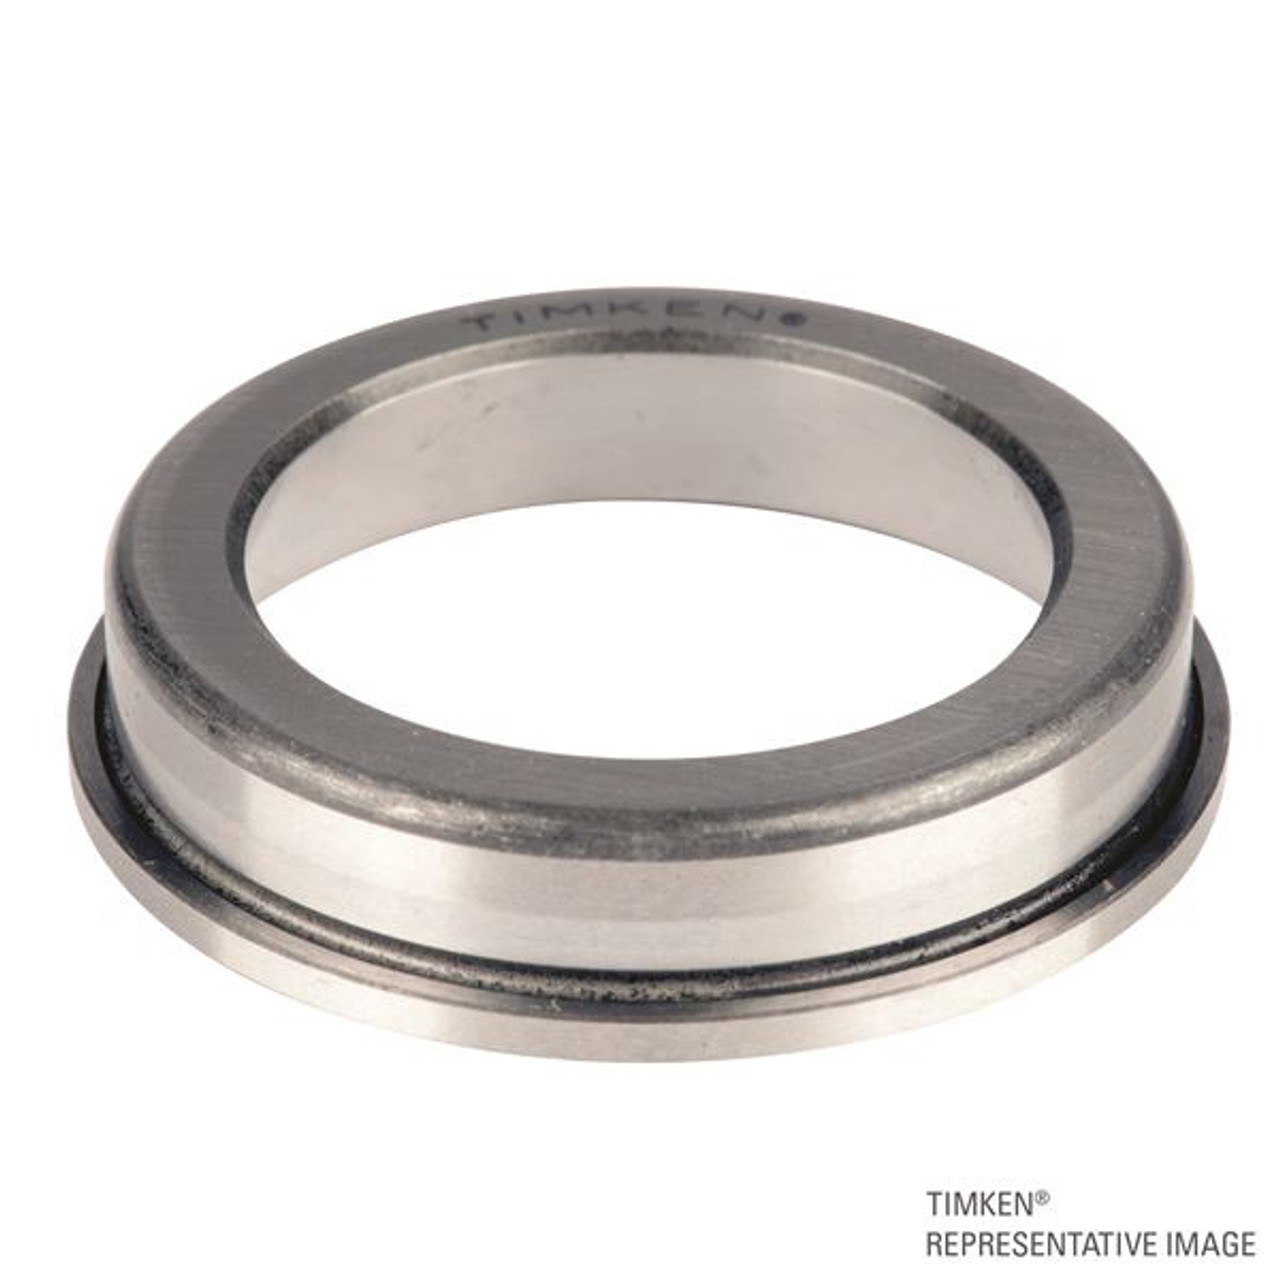 Timken® Single Row Flanged Cup - Precision Class  33462B-3